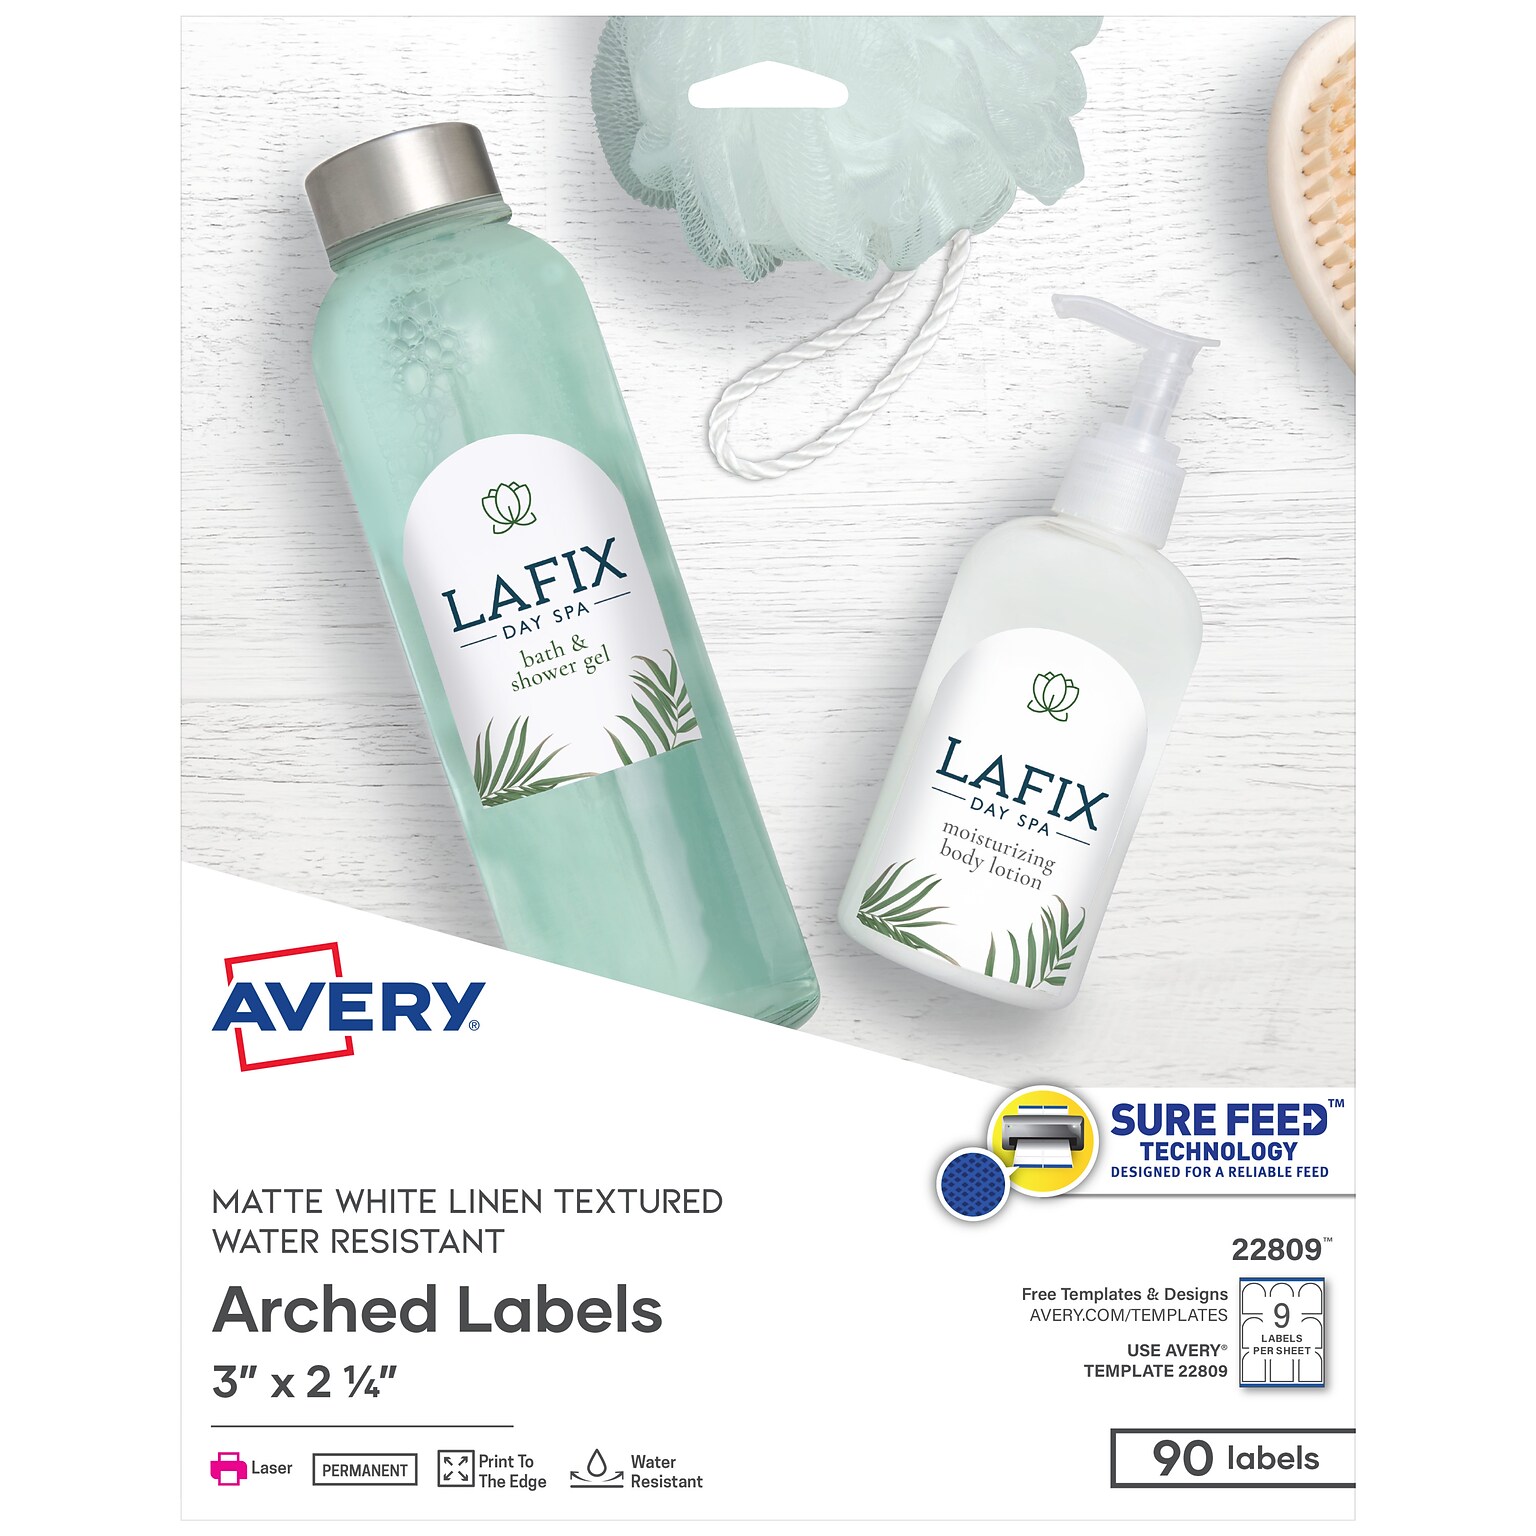 Avery Print-to-the-Edge Laser Arched Labels, 3 x 2 1/4, Textured White, 9 Labels/Sheet, 10 Sheets/Pack, 90 Labels/Pack (22809)